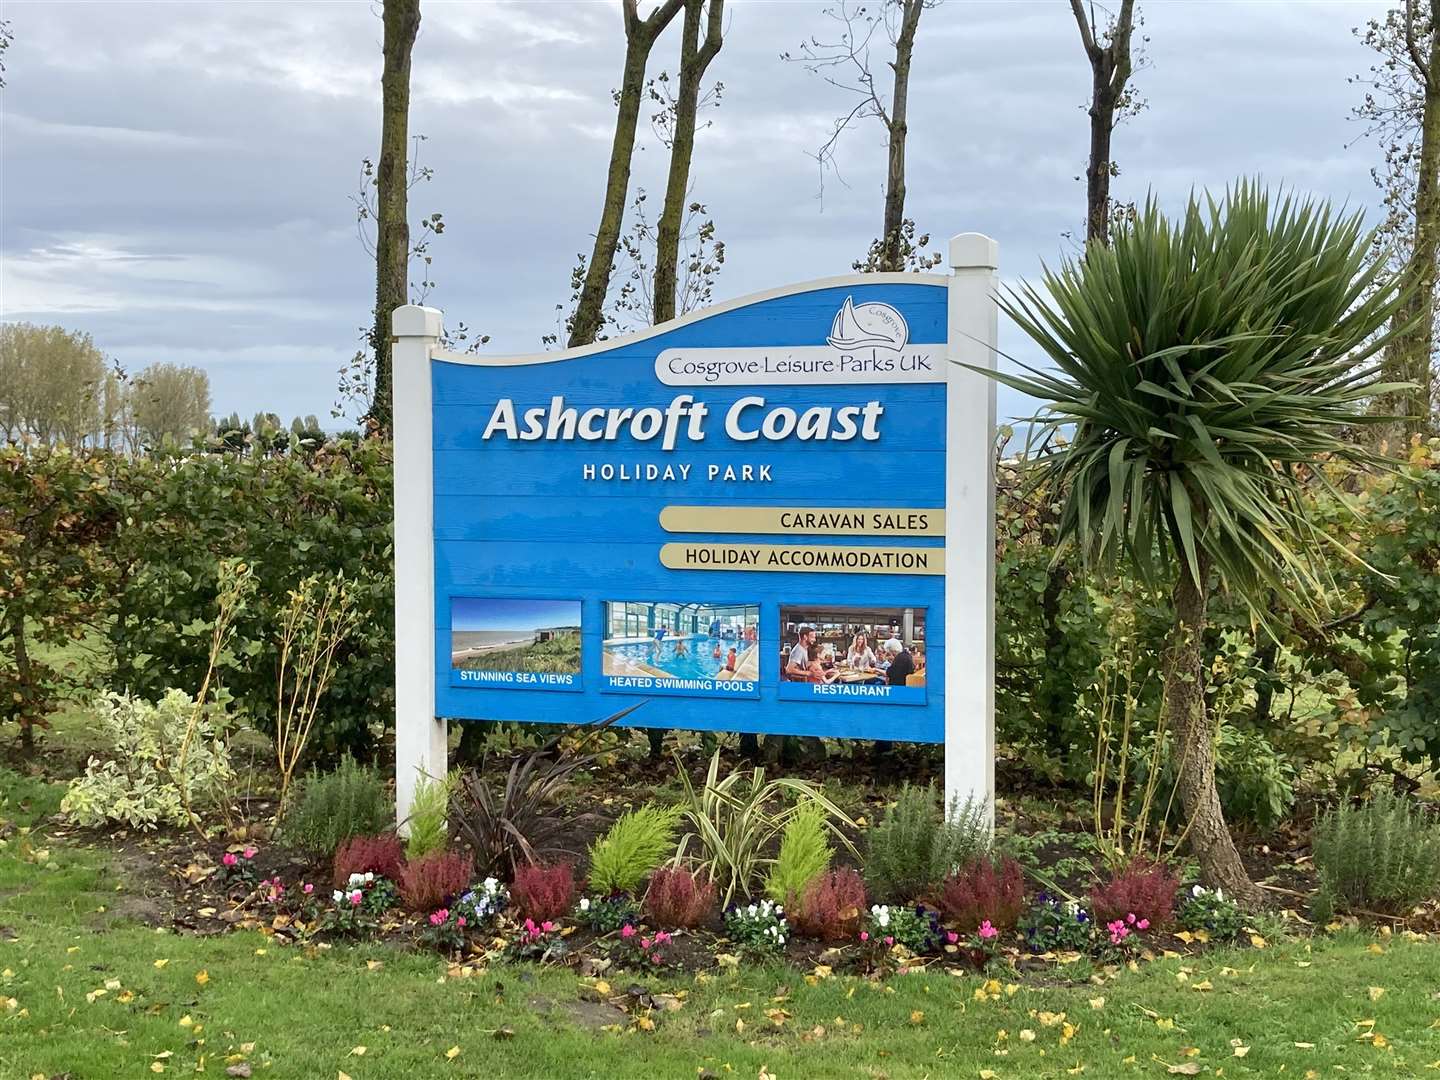 Entrance to Ashcroft Coast holiday park in Plough Road, Minster